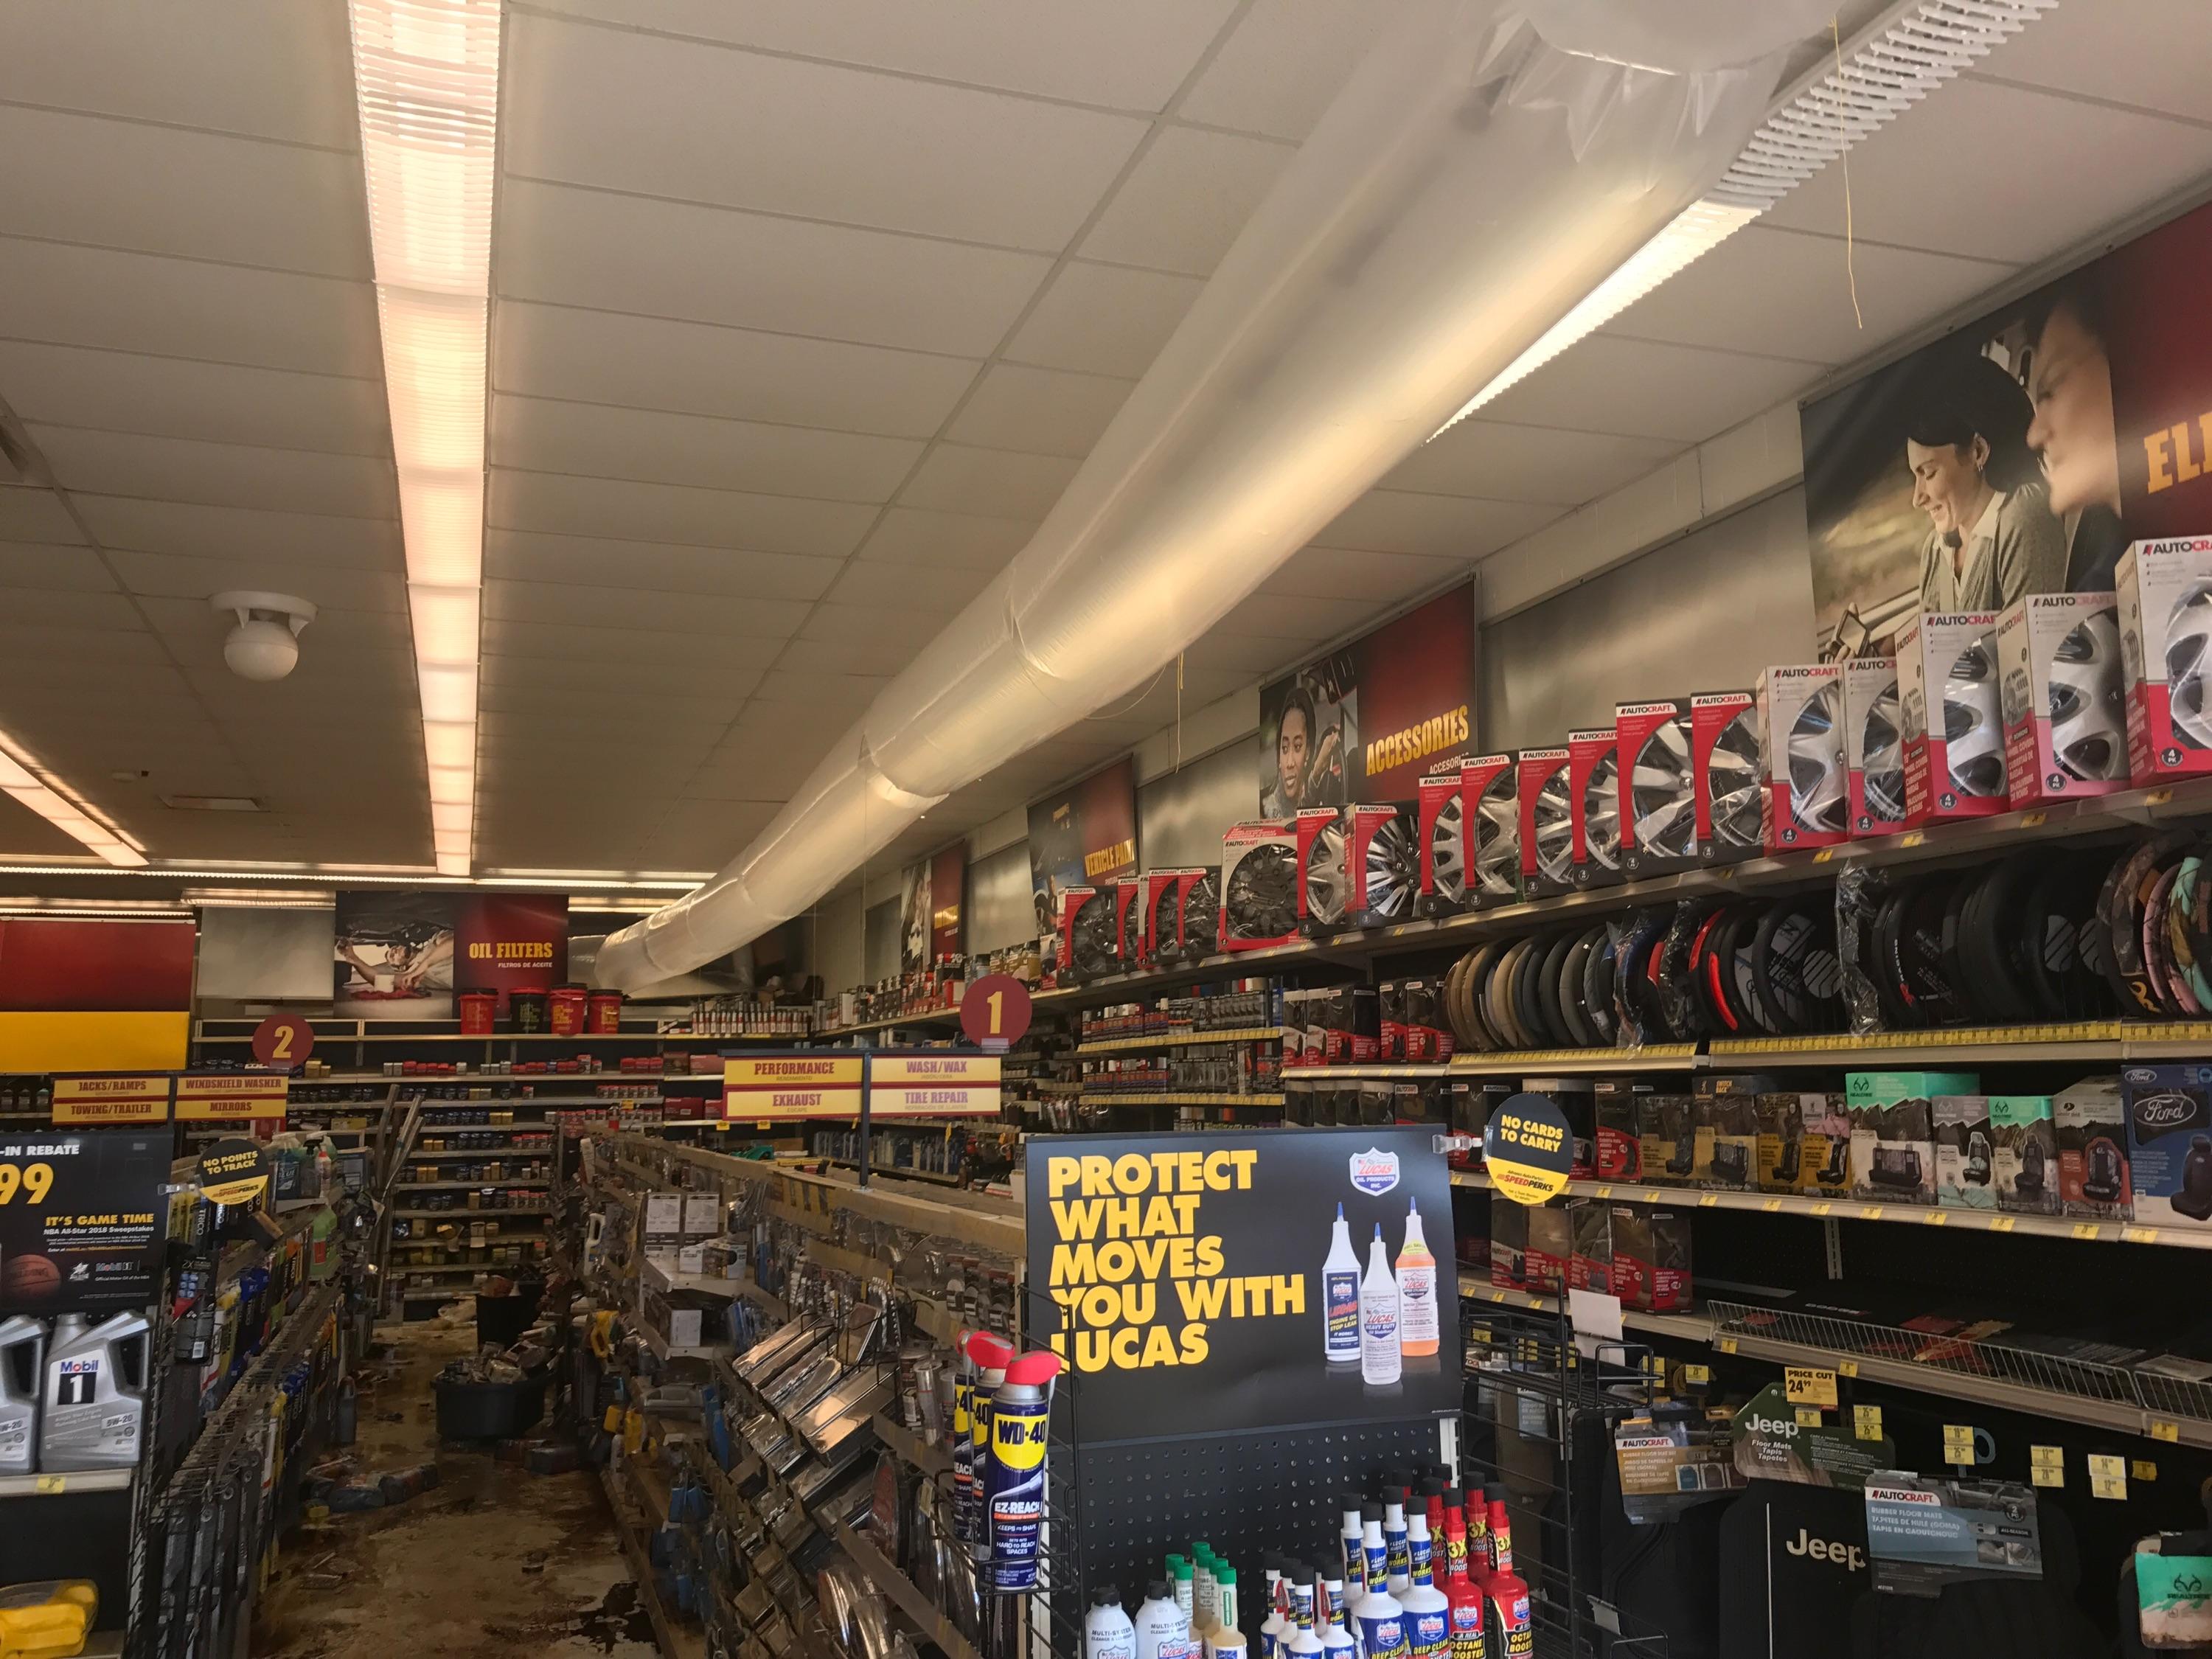 This Advance Auto Parts store flooded by Hurricane Harvey has water covering the floor.